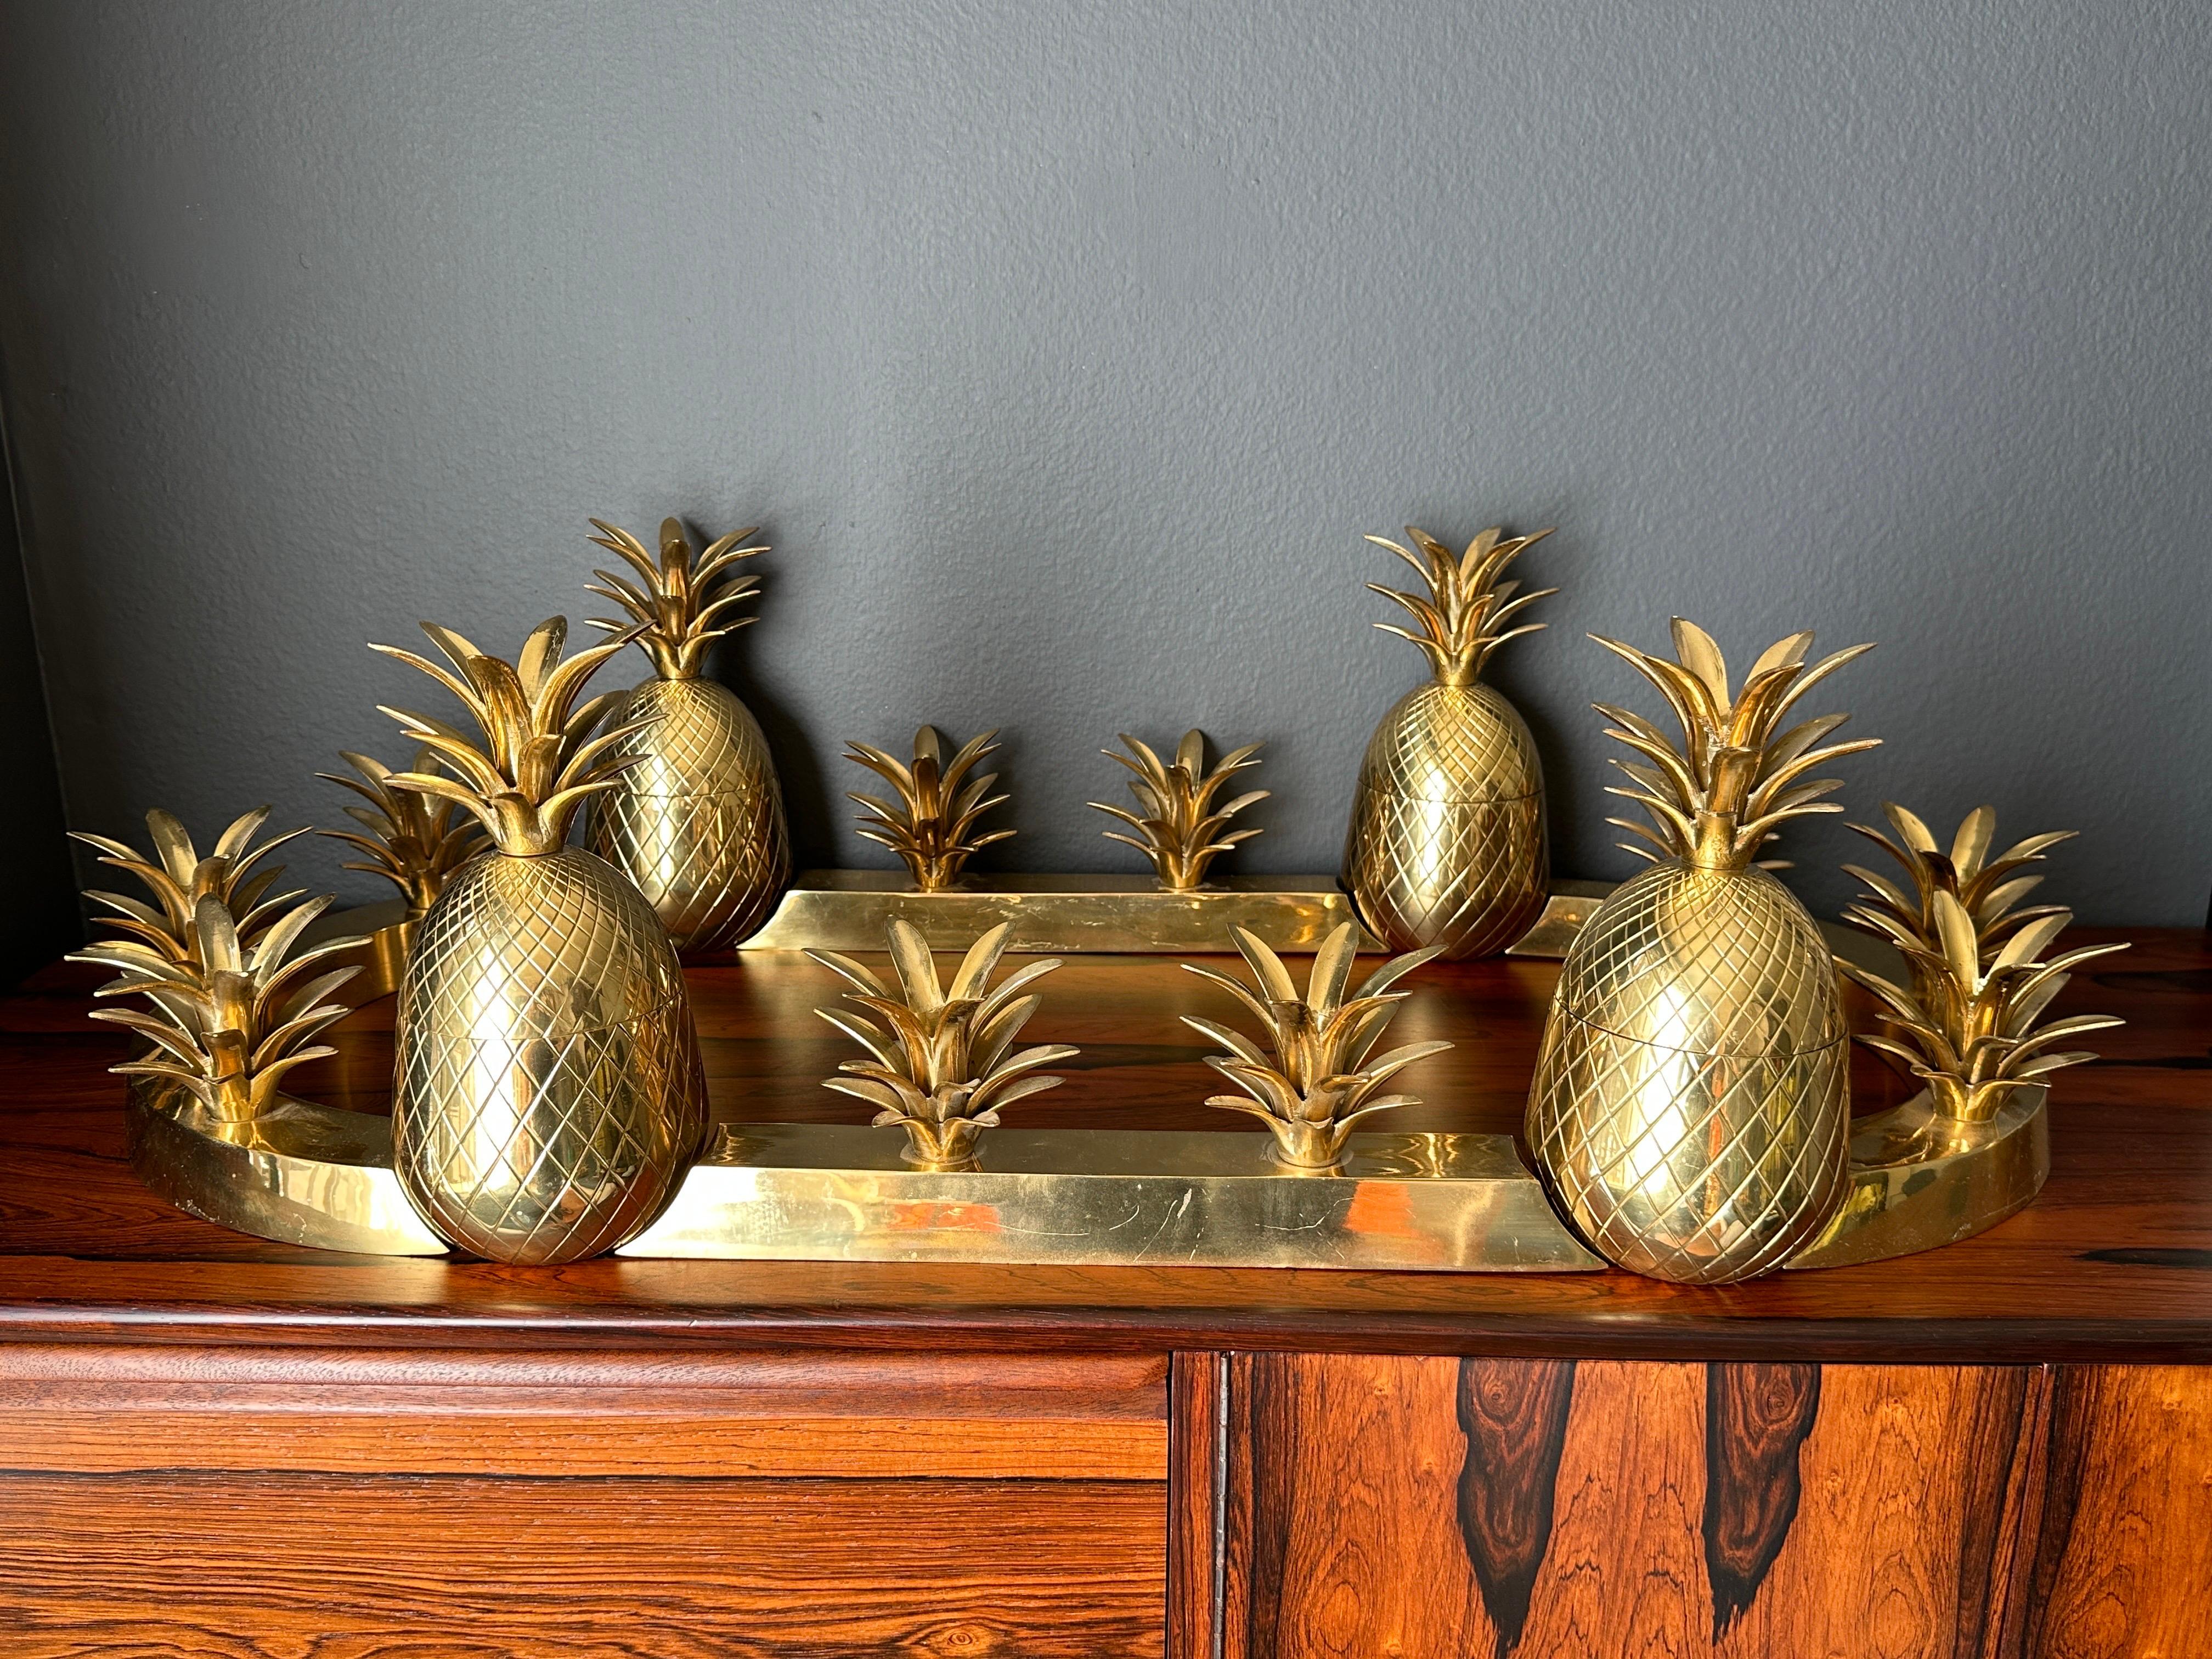 Brass pineapple centerpiece / candleholder. Pineapples can also be used to store candy or nuts.